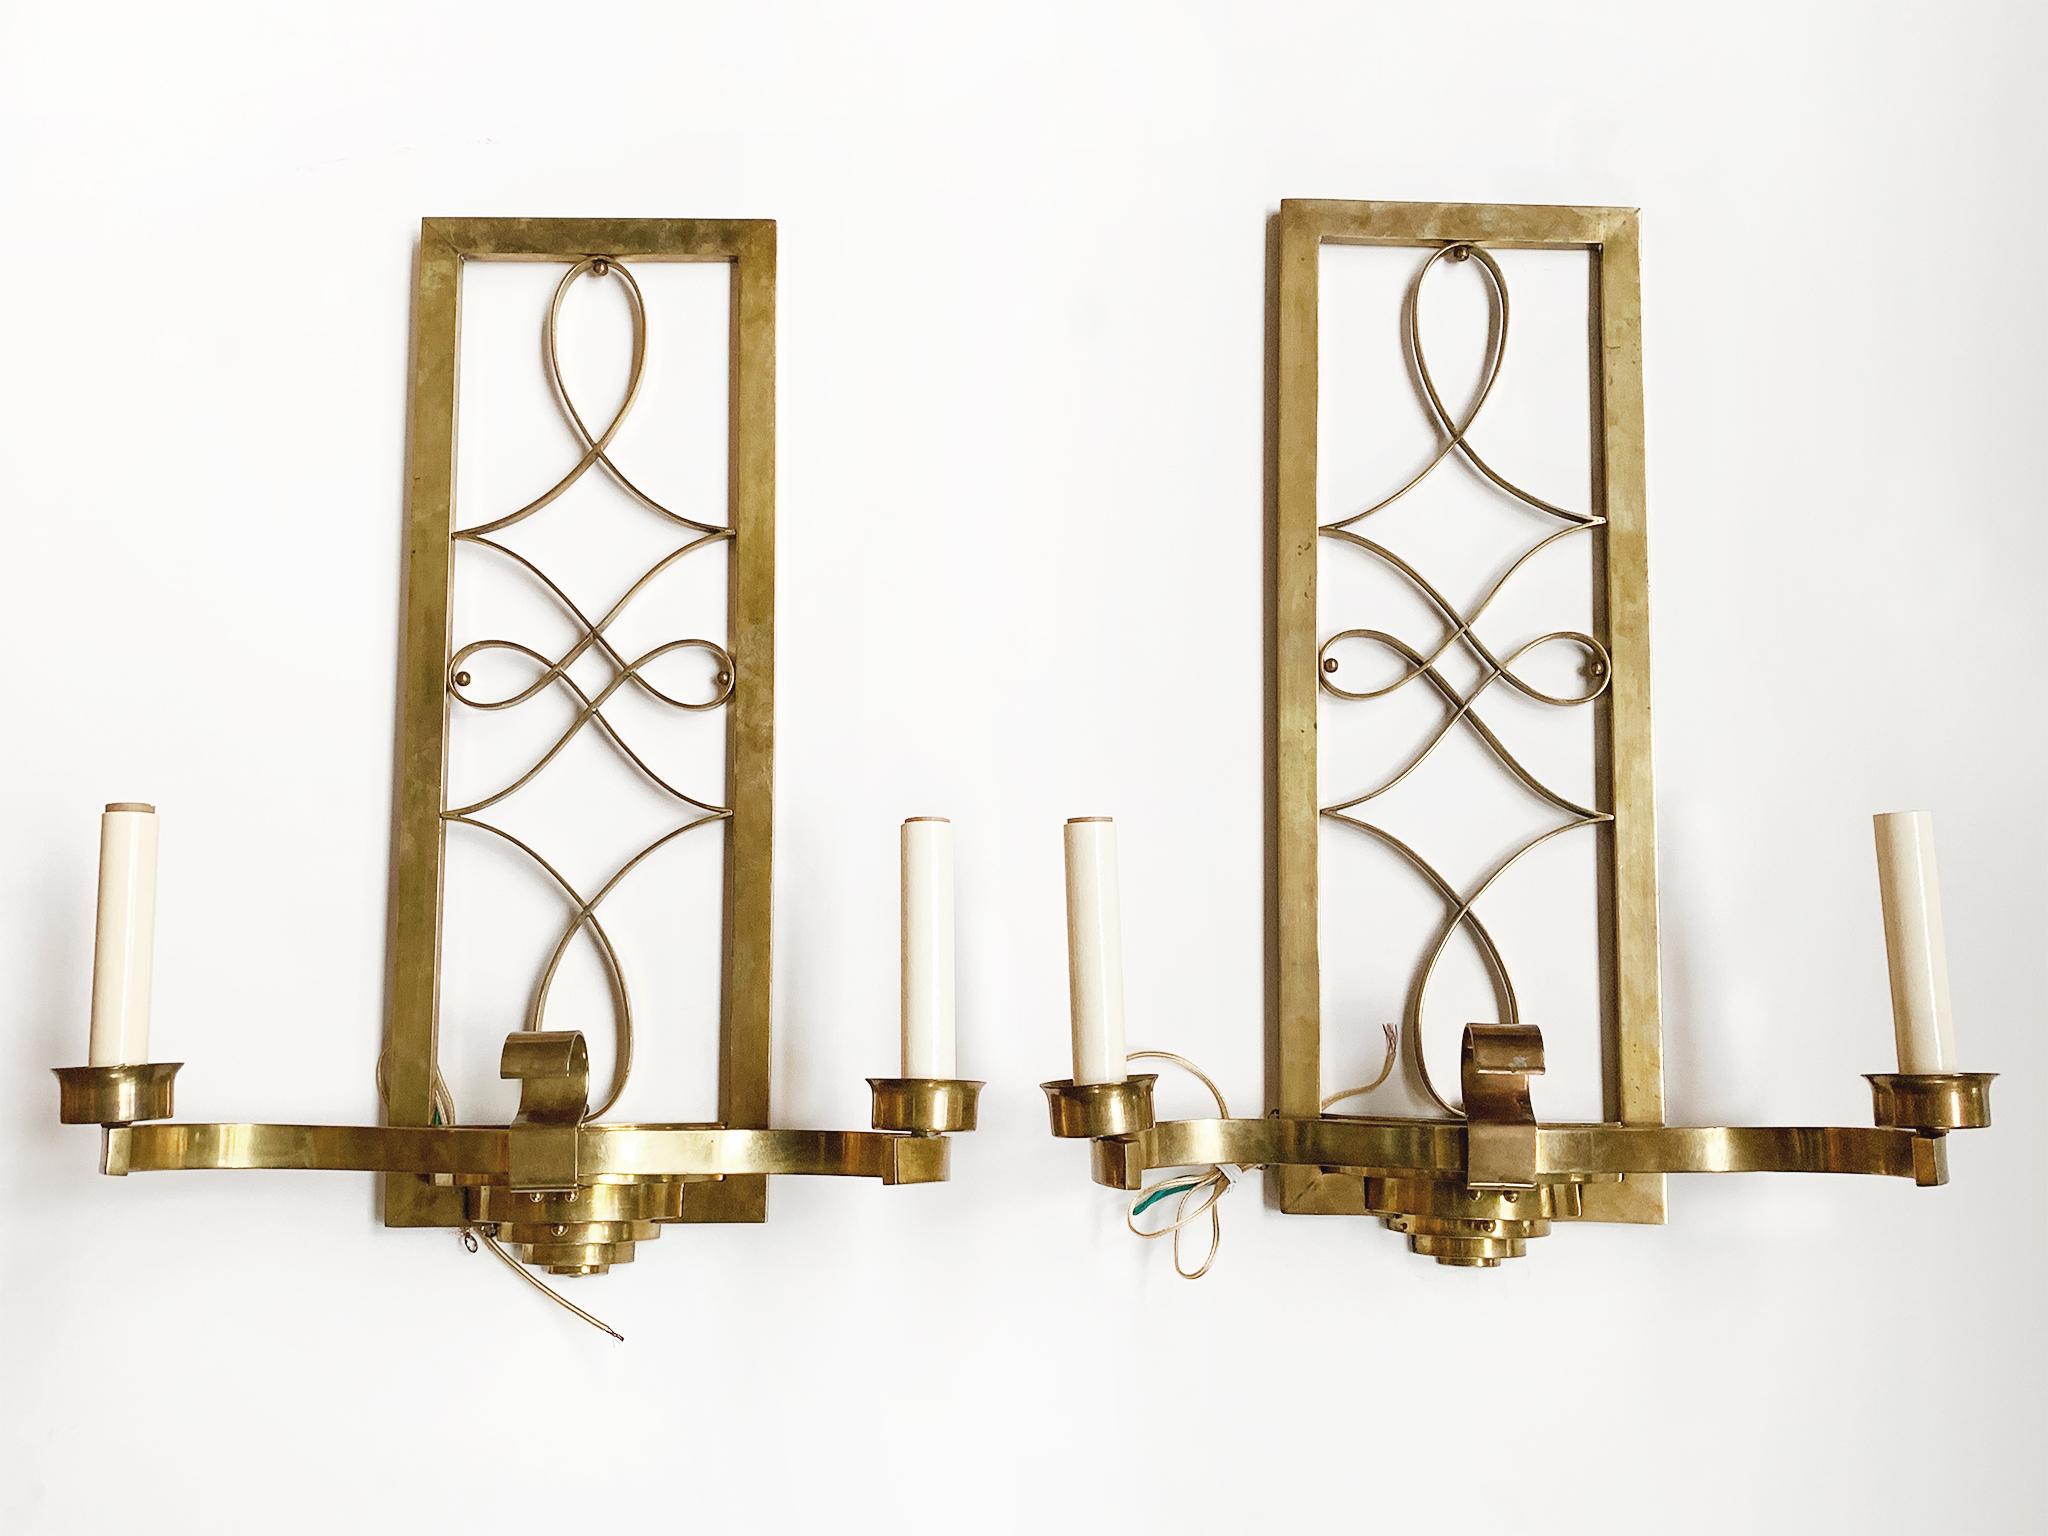 An elegant pair of Art Deco brass sconces, early 20th century. The back frame is designed with a whimsical curlicue motif that creates a lattice. Two arms curve outward and culminate into candle-style sockets. The sconces are newly rewired and